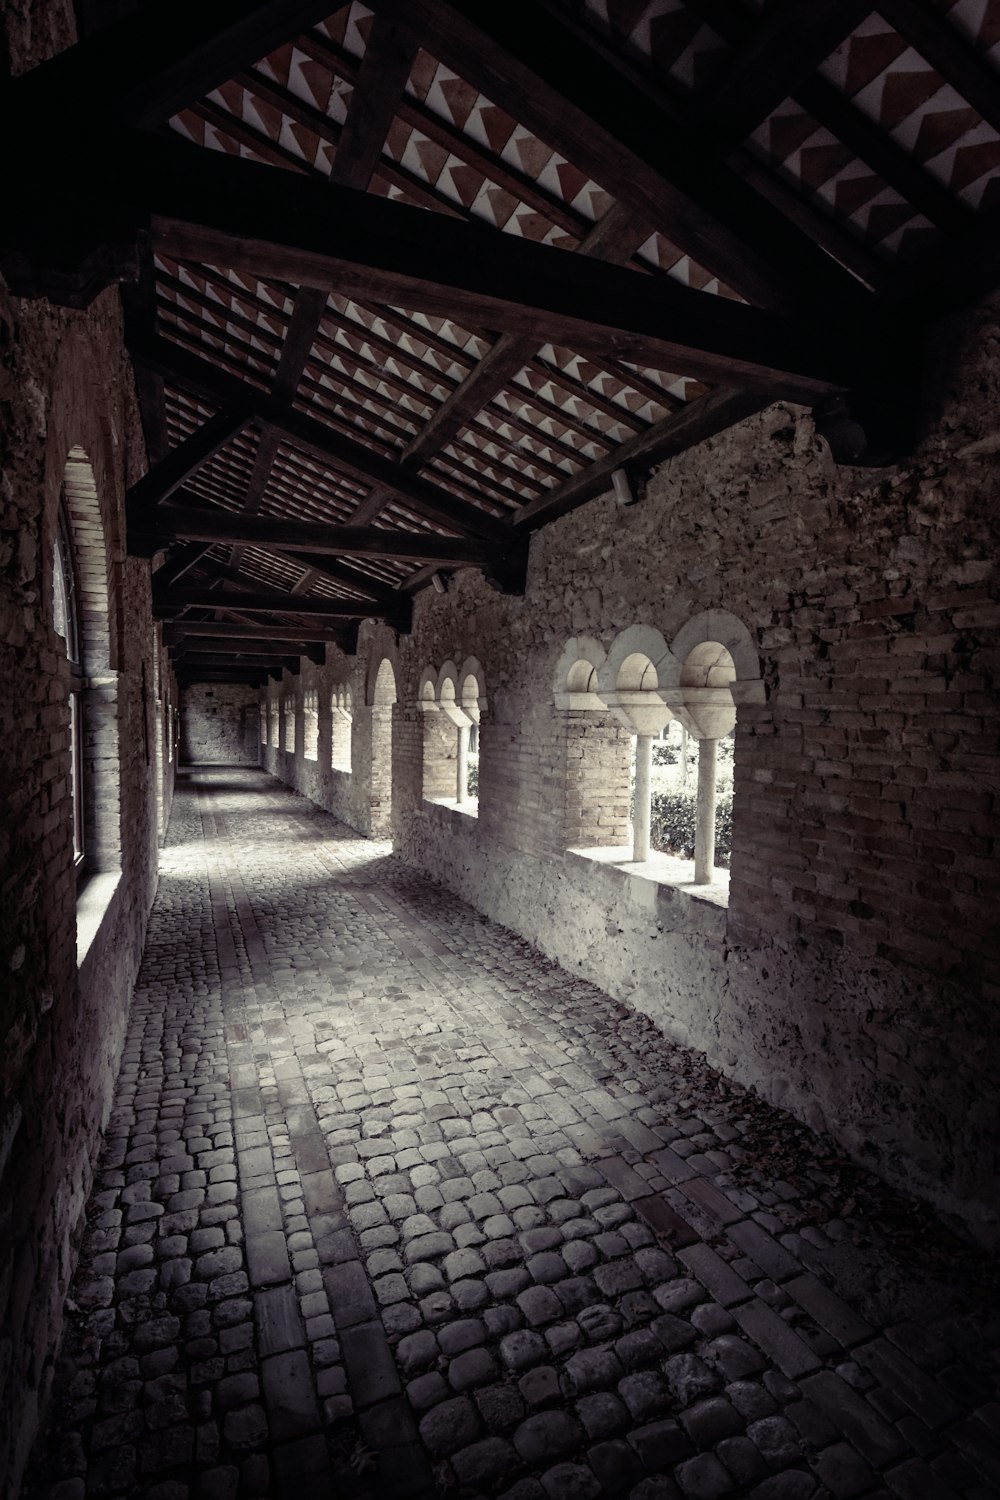 a dark alley with brick walls and arched windows